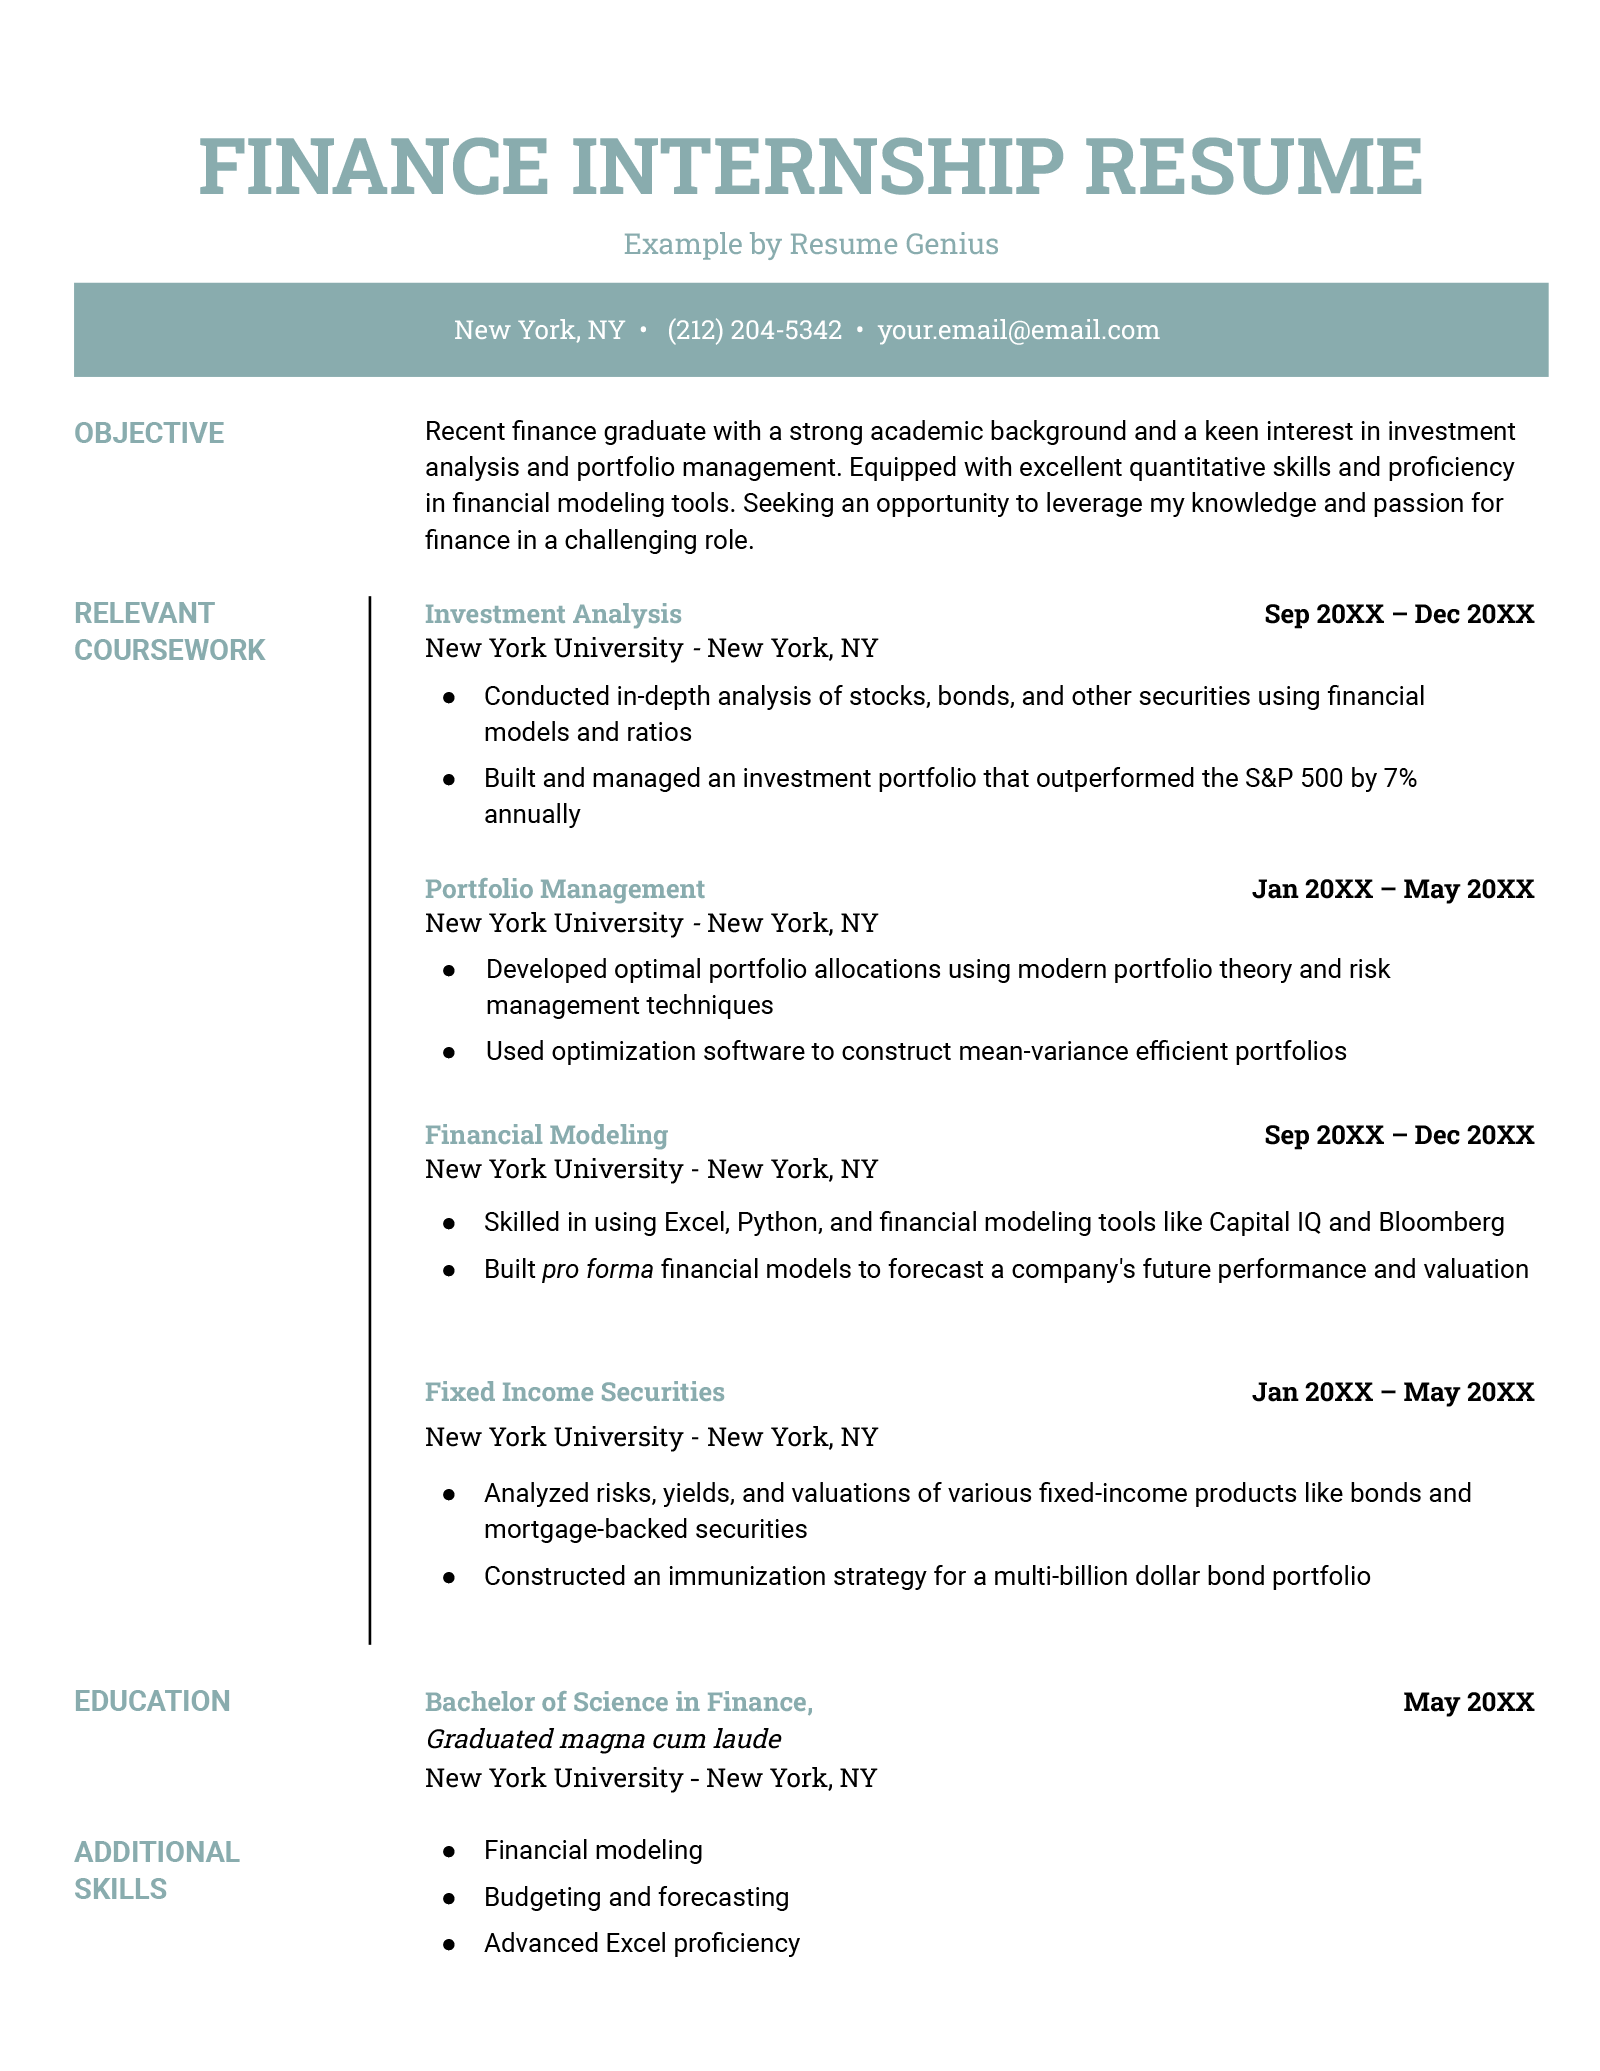 An example resume for a finance internship.